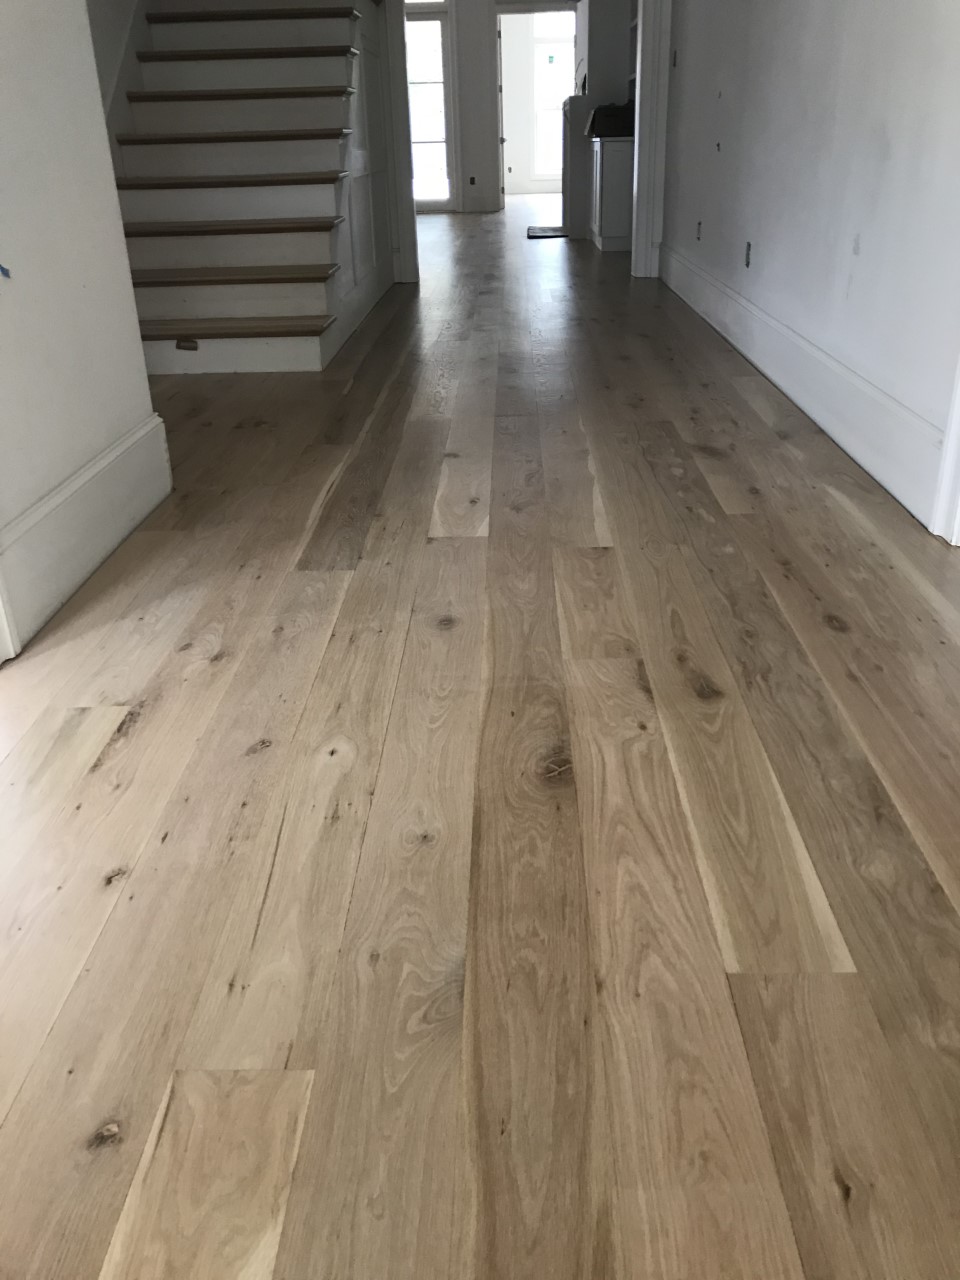 This is a photo of white oak flooring with a satin finish. It has a weather washed appearance.